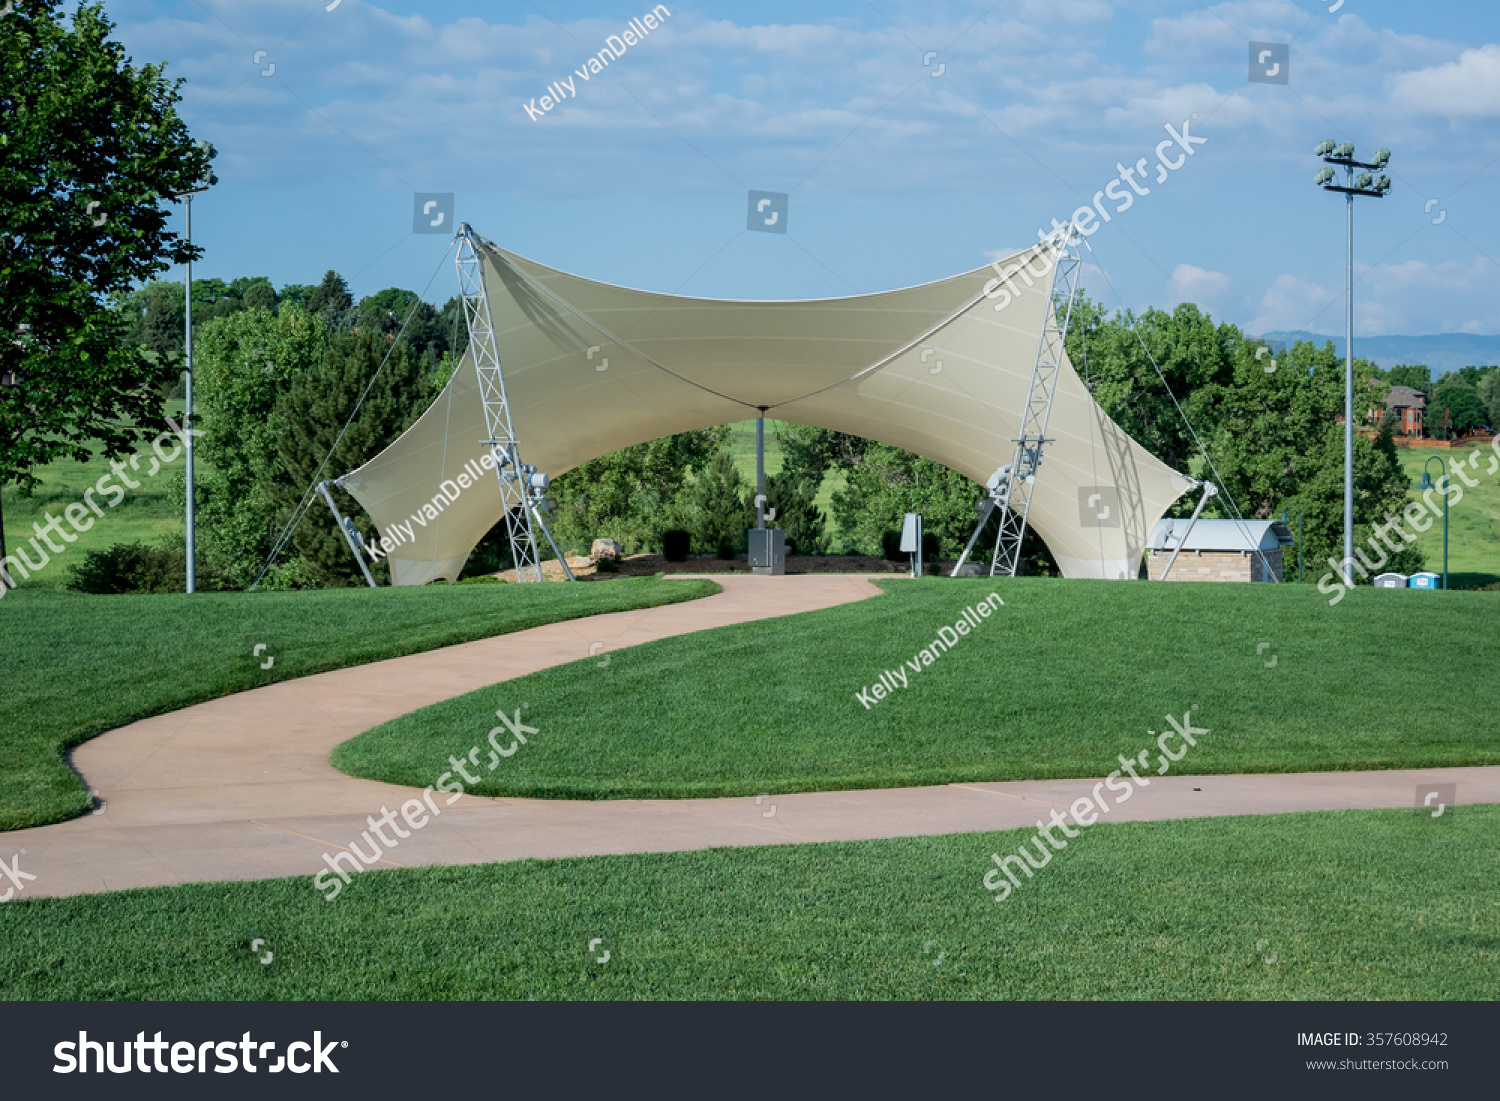 An awning covers an amphitheater in a public park #357608942